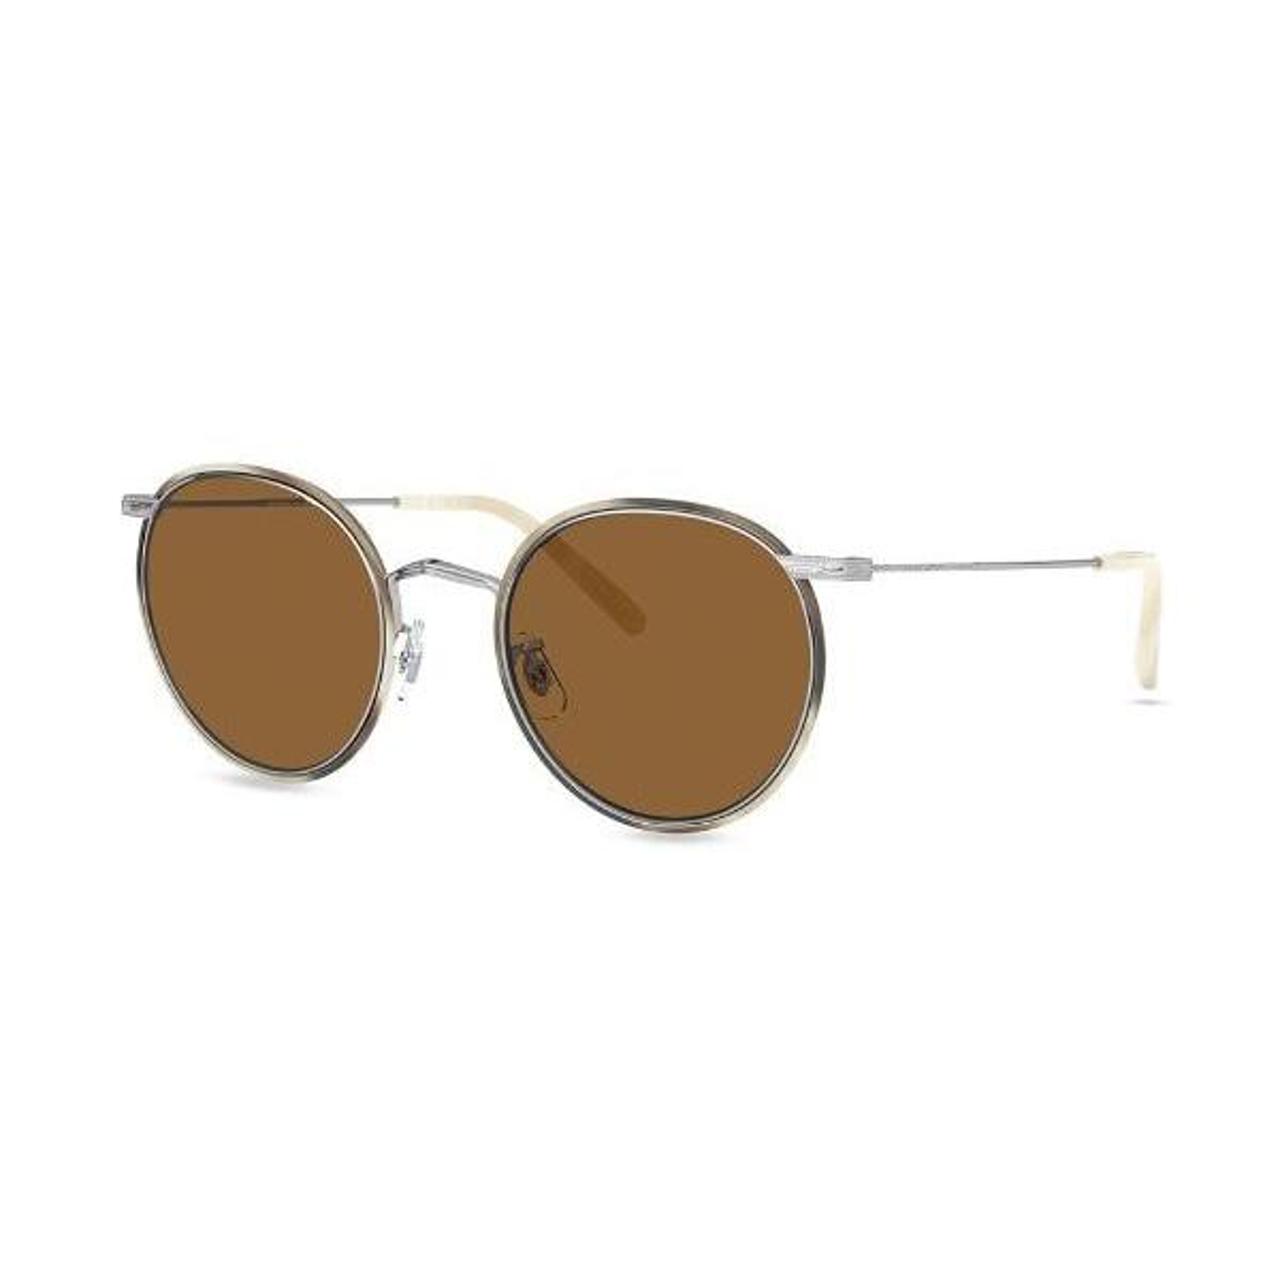 Oliver Peoples Women's Tan and Brown Sunglasses (3)